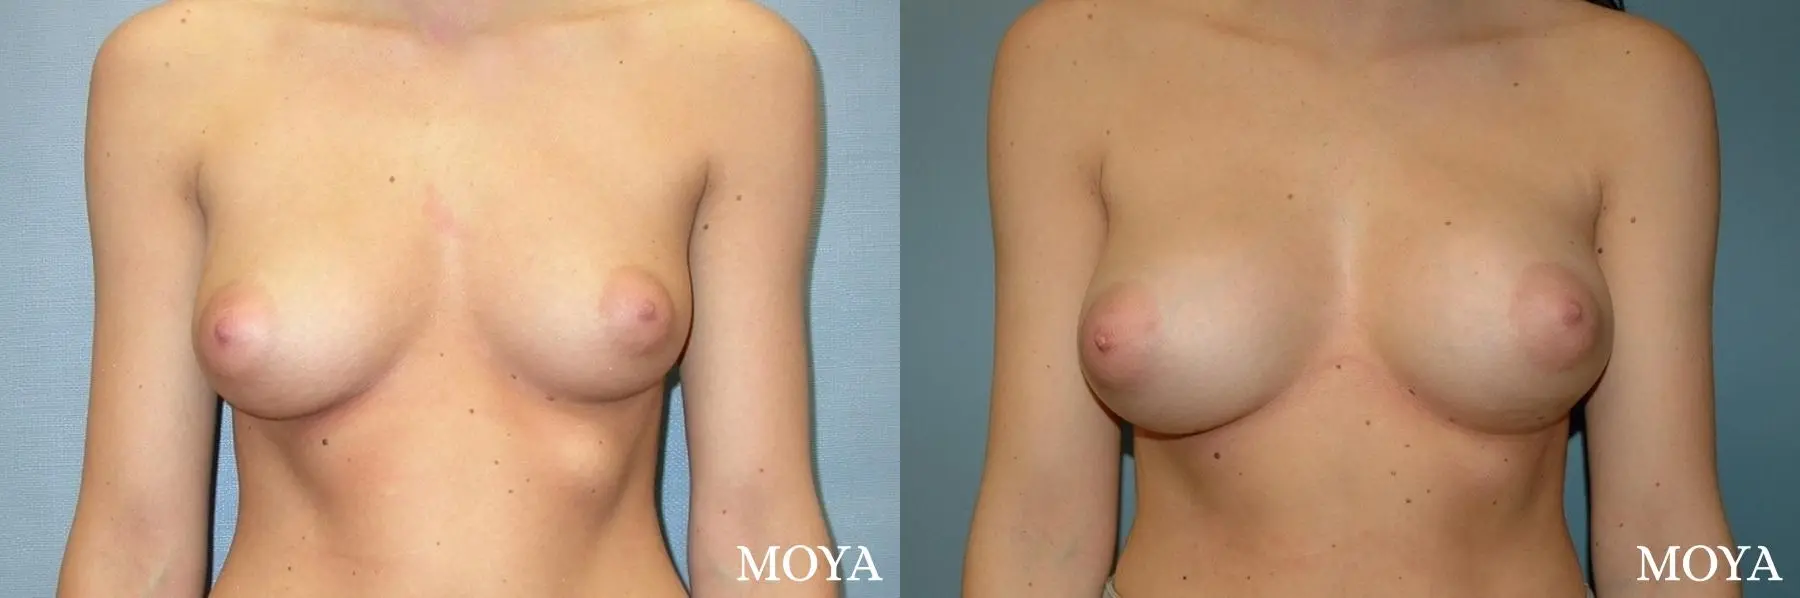 Breast Asymmetry: Patient 2 - Before and After 1